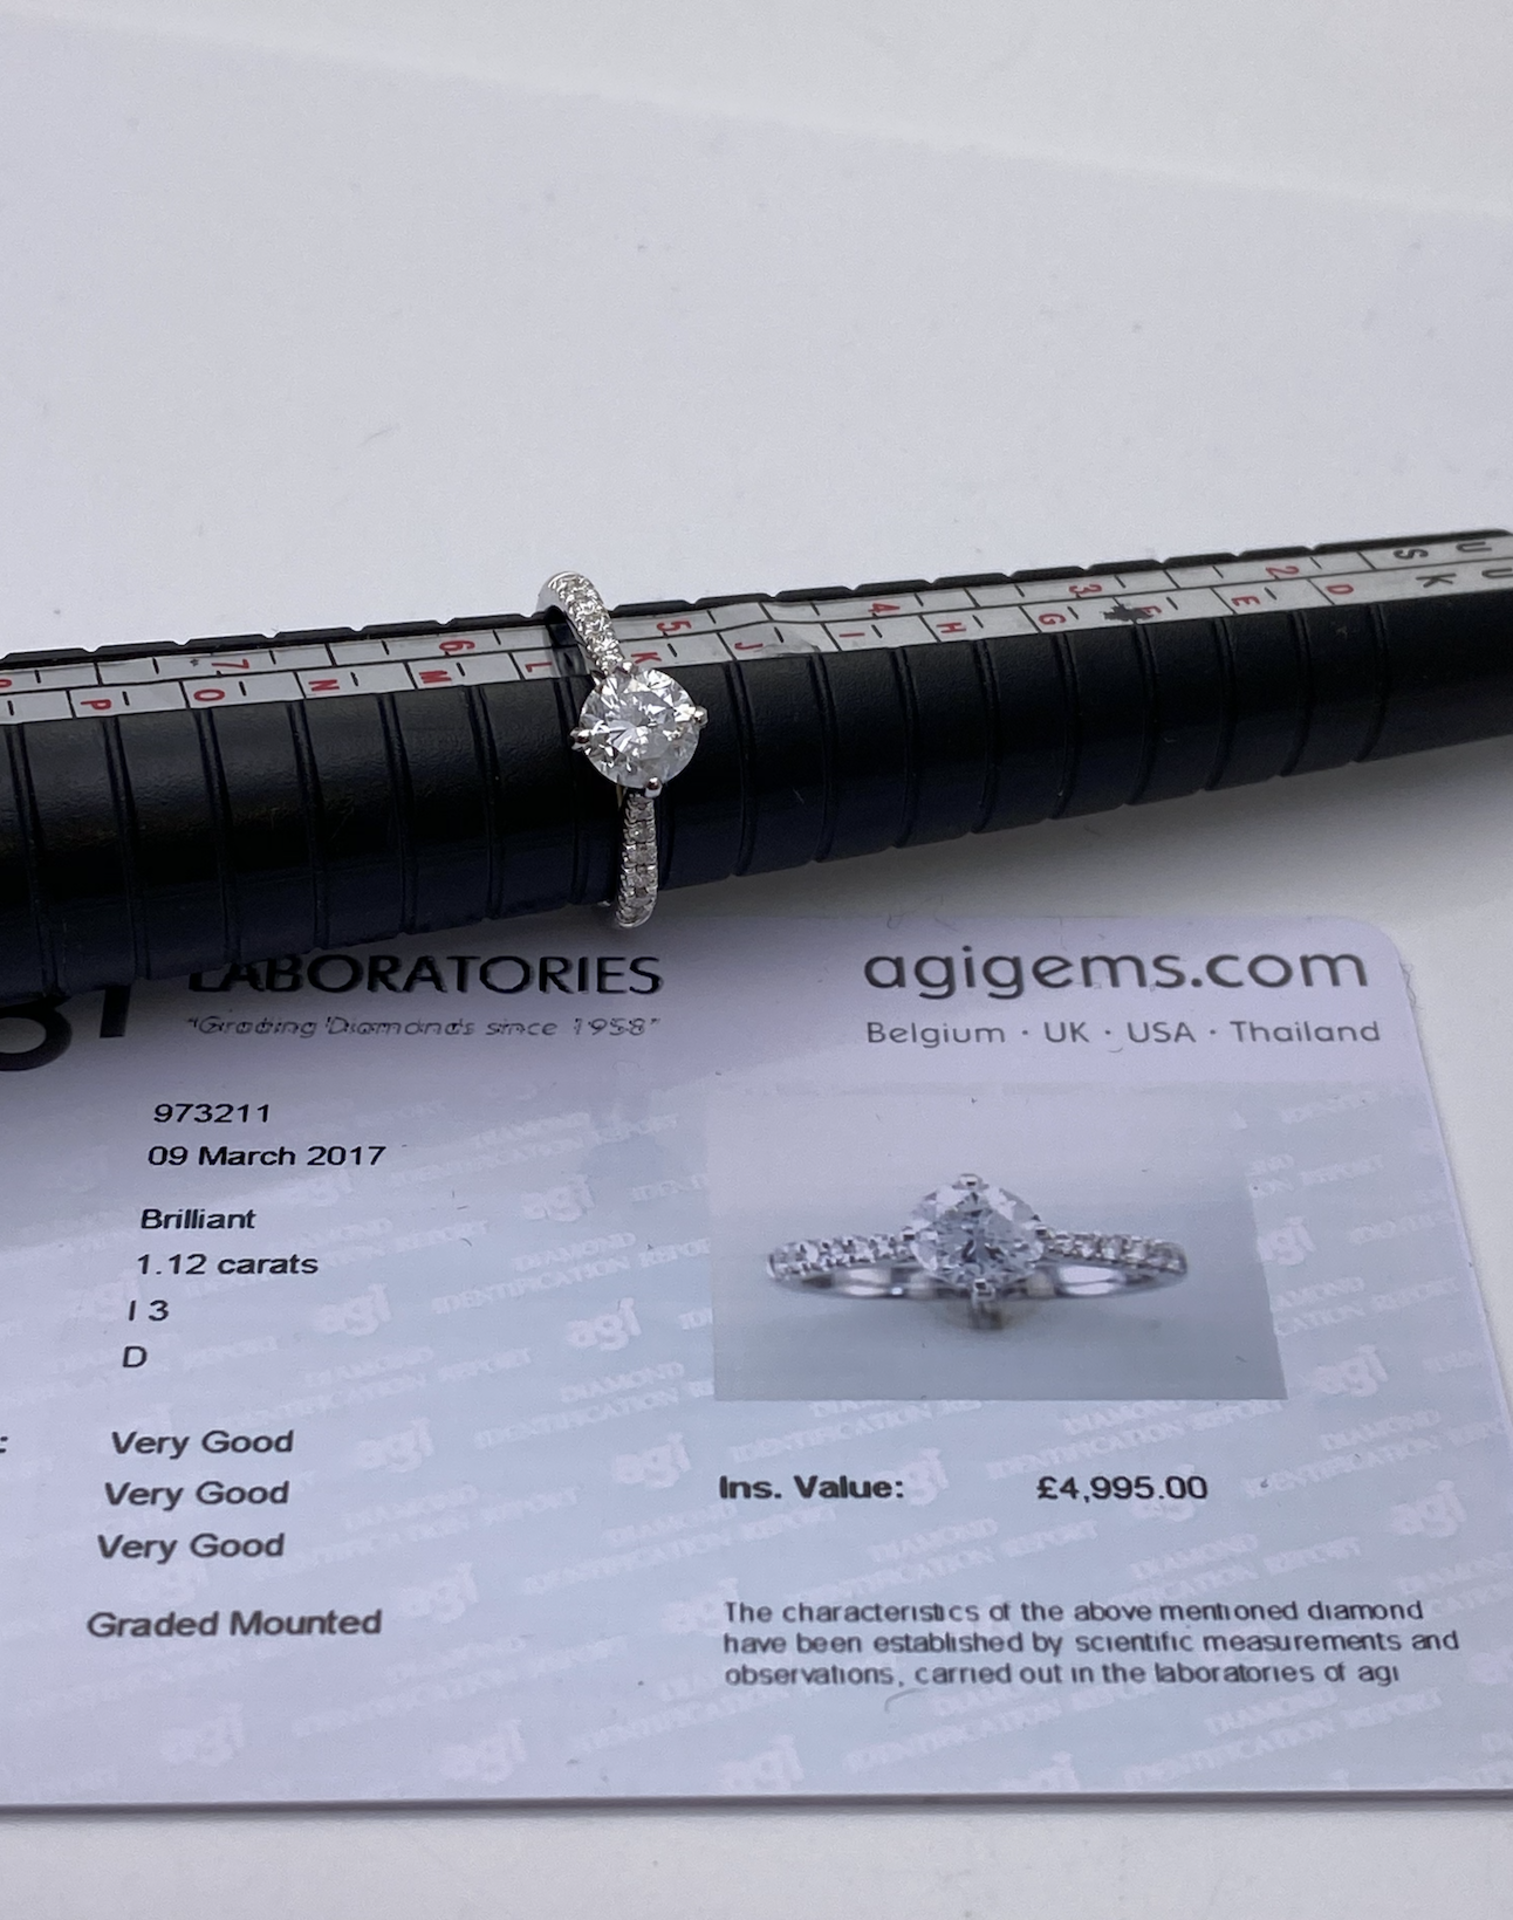 ***£4995.00*** 18CT WHITE GOLD LADIES DIAMOND SOLITAIRE RING SET WITH DIAMONDS ON THE SHANK, TOTAL